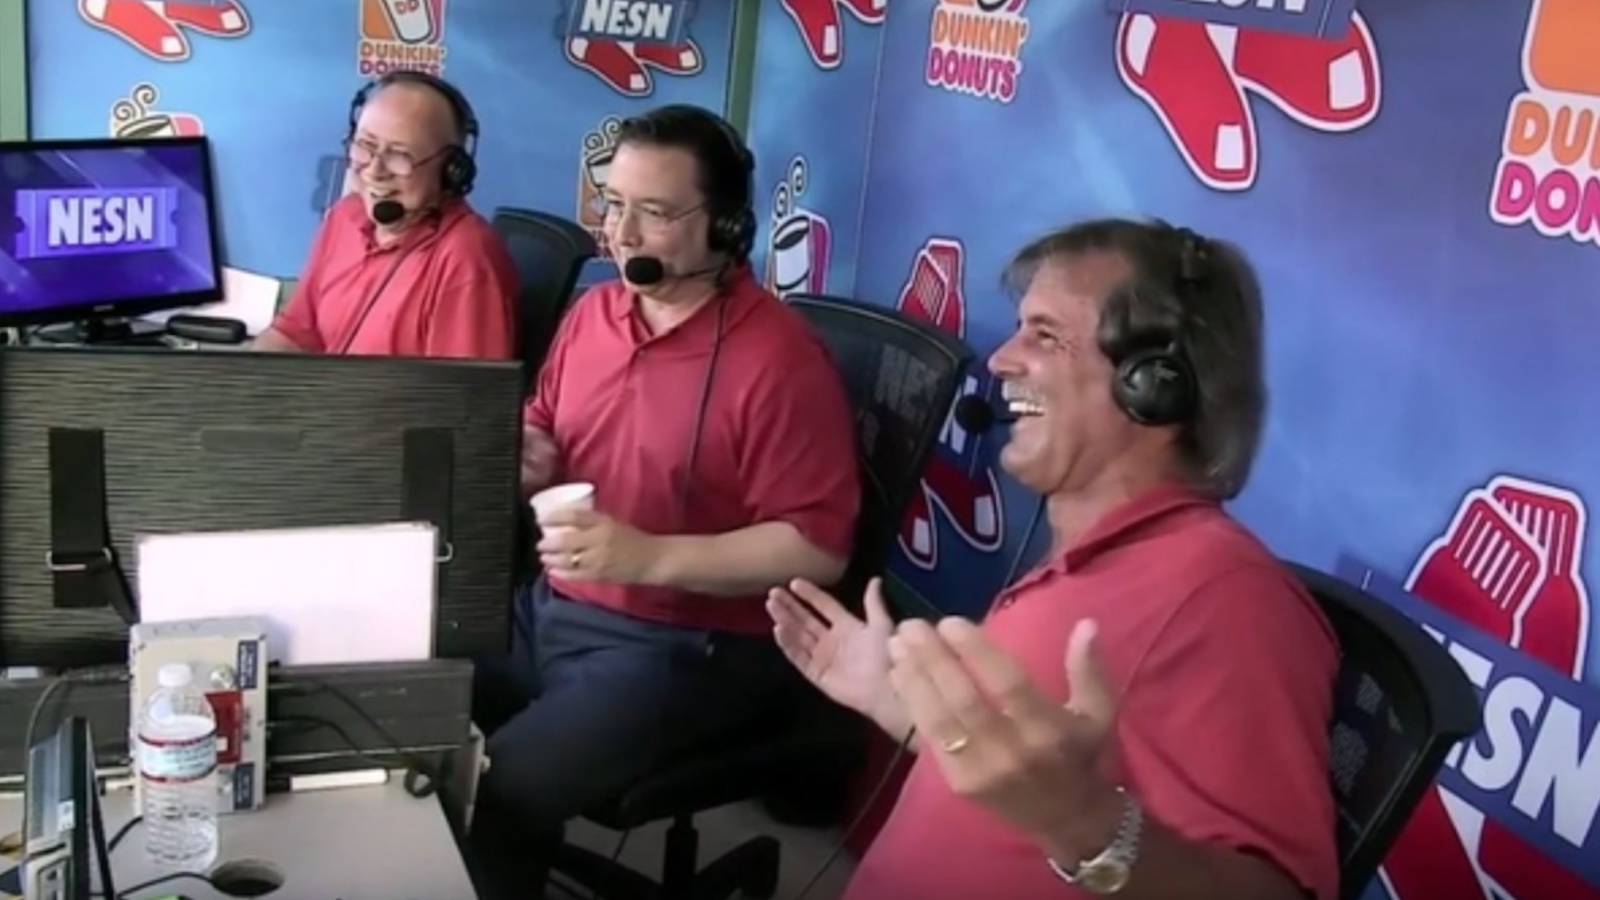 5 Best Dennis Eckersley Replacements in Red Sox Broadcast Booth